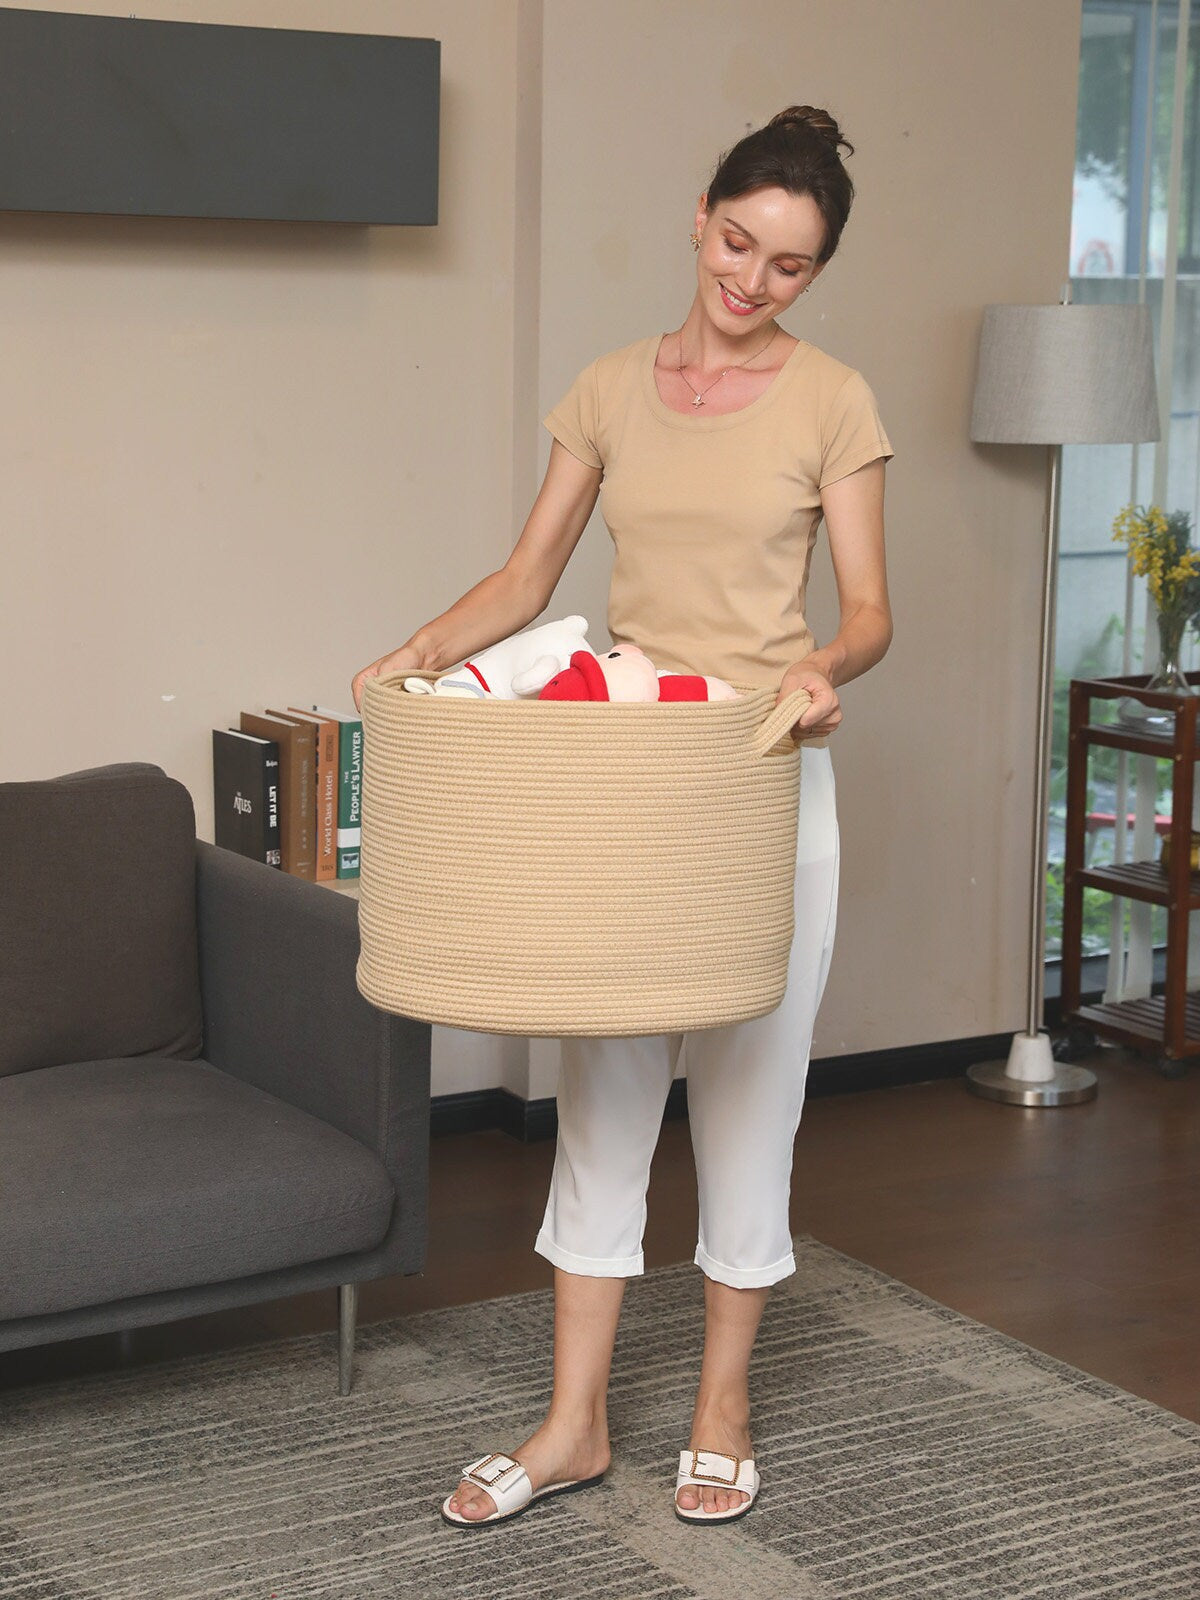 20" x 20" x 15" Extra Large Storage Basket with Lid, Cotton Rope Storage Baskets, Laundry Hamper, Toy Bin, All Beige Basket with Cover